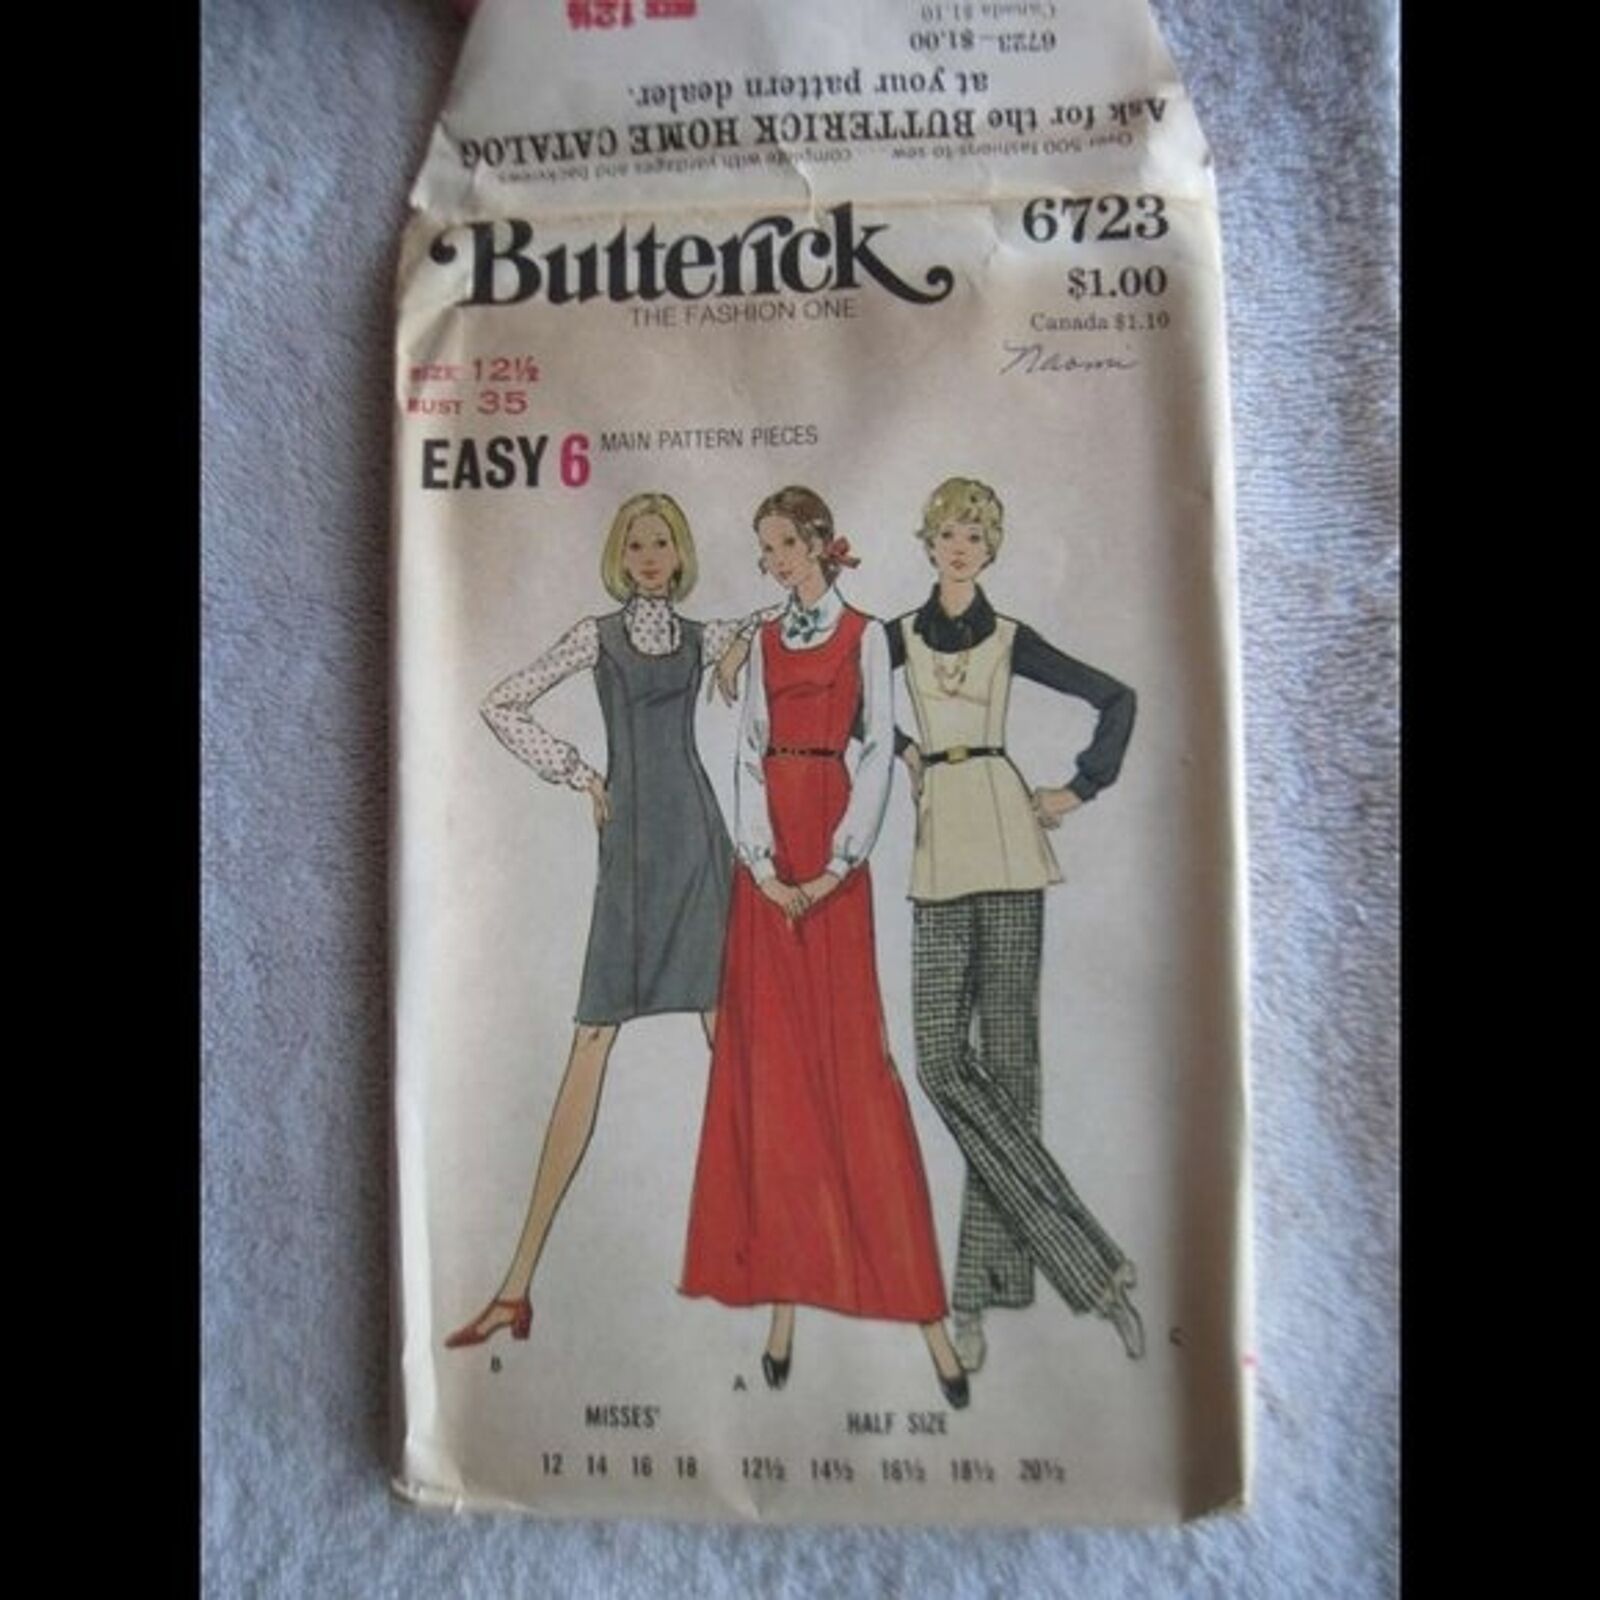 Butterick Fashion One 6723 Size 12 1/2 Bust 35 Misses' & Half Jumper Tunic Pants